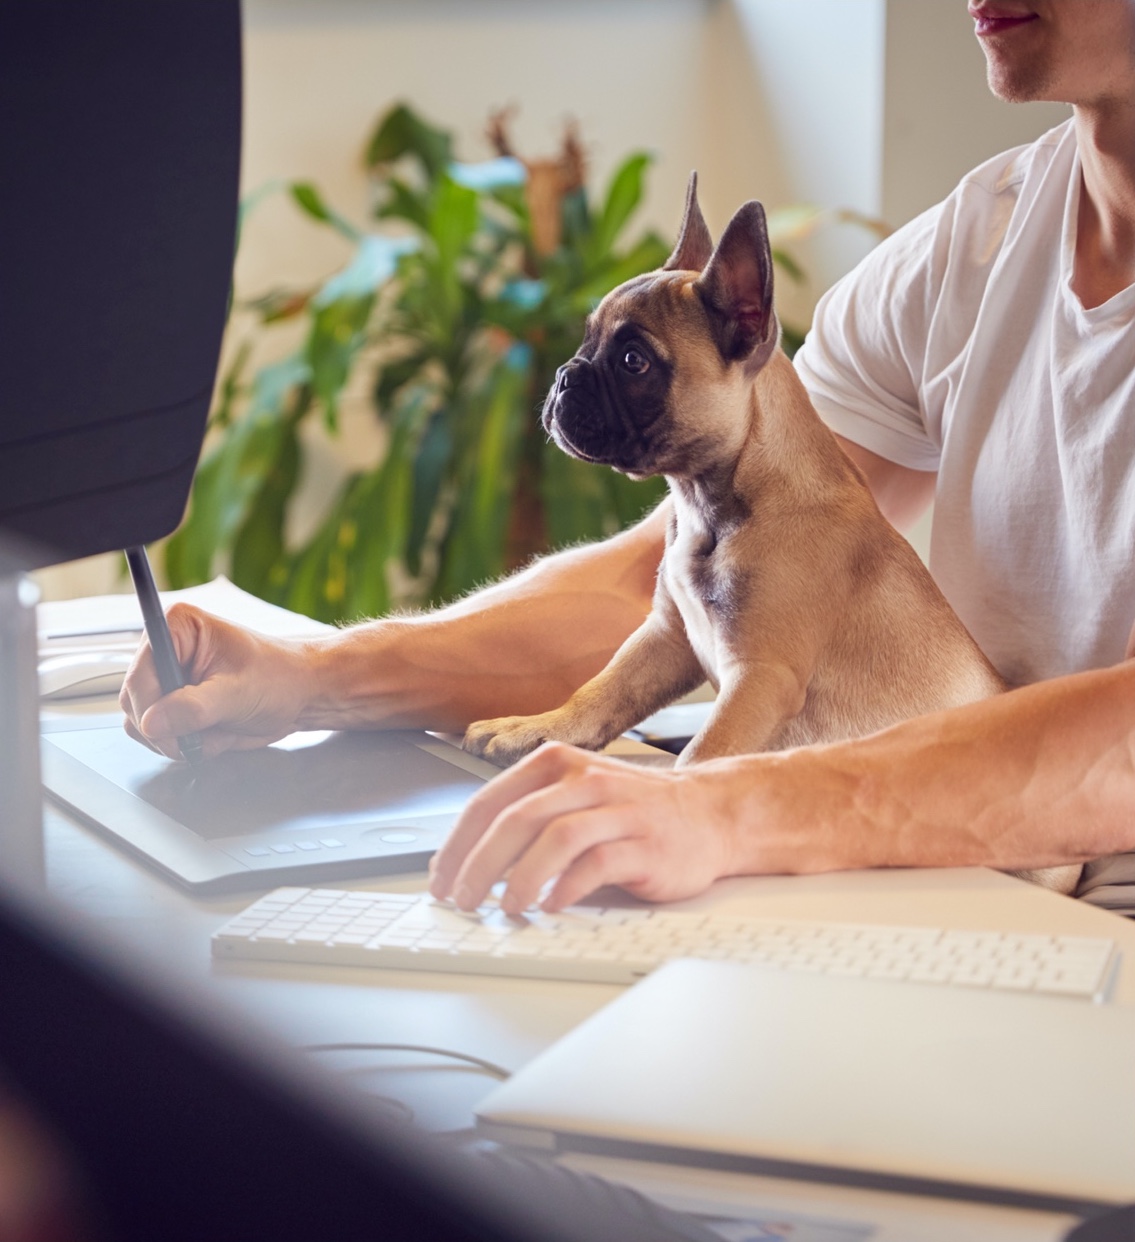 A puppy perks up as a woman works on her laptop with sytlus